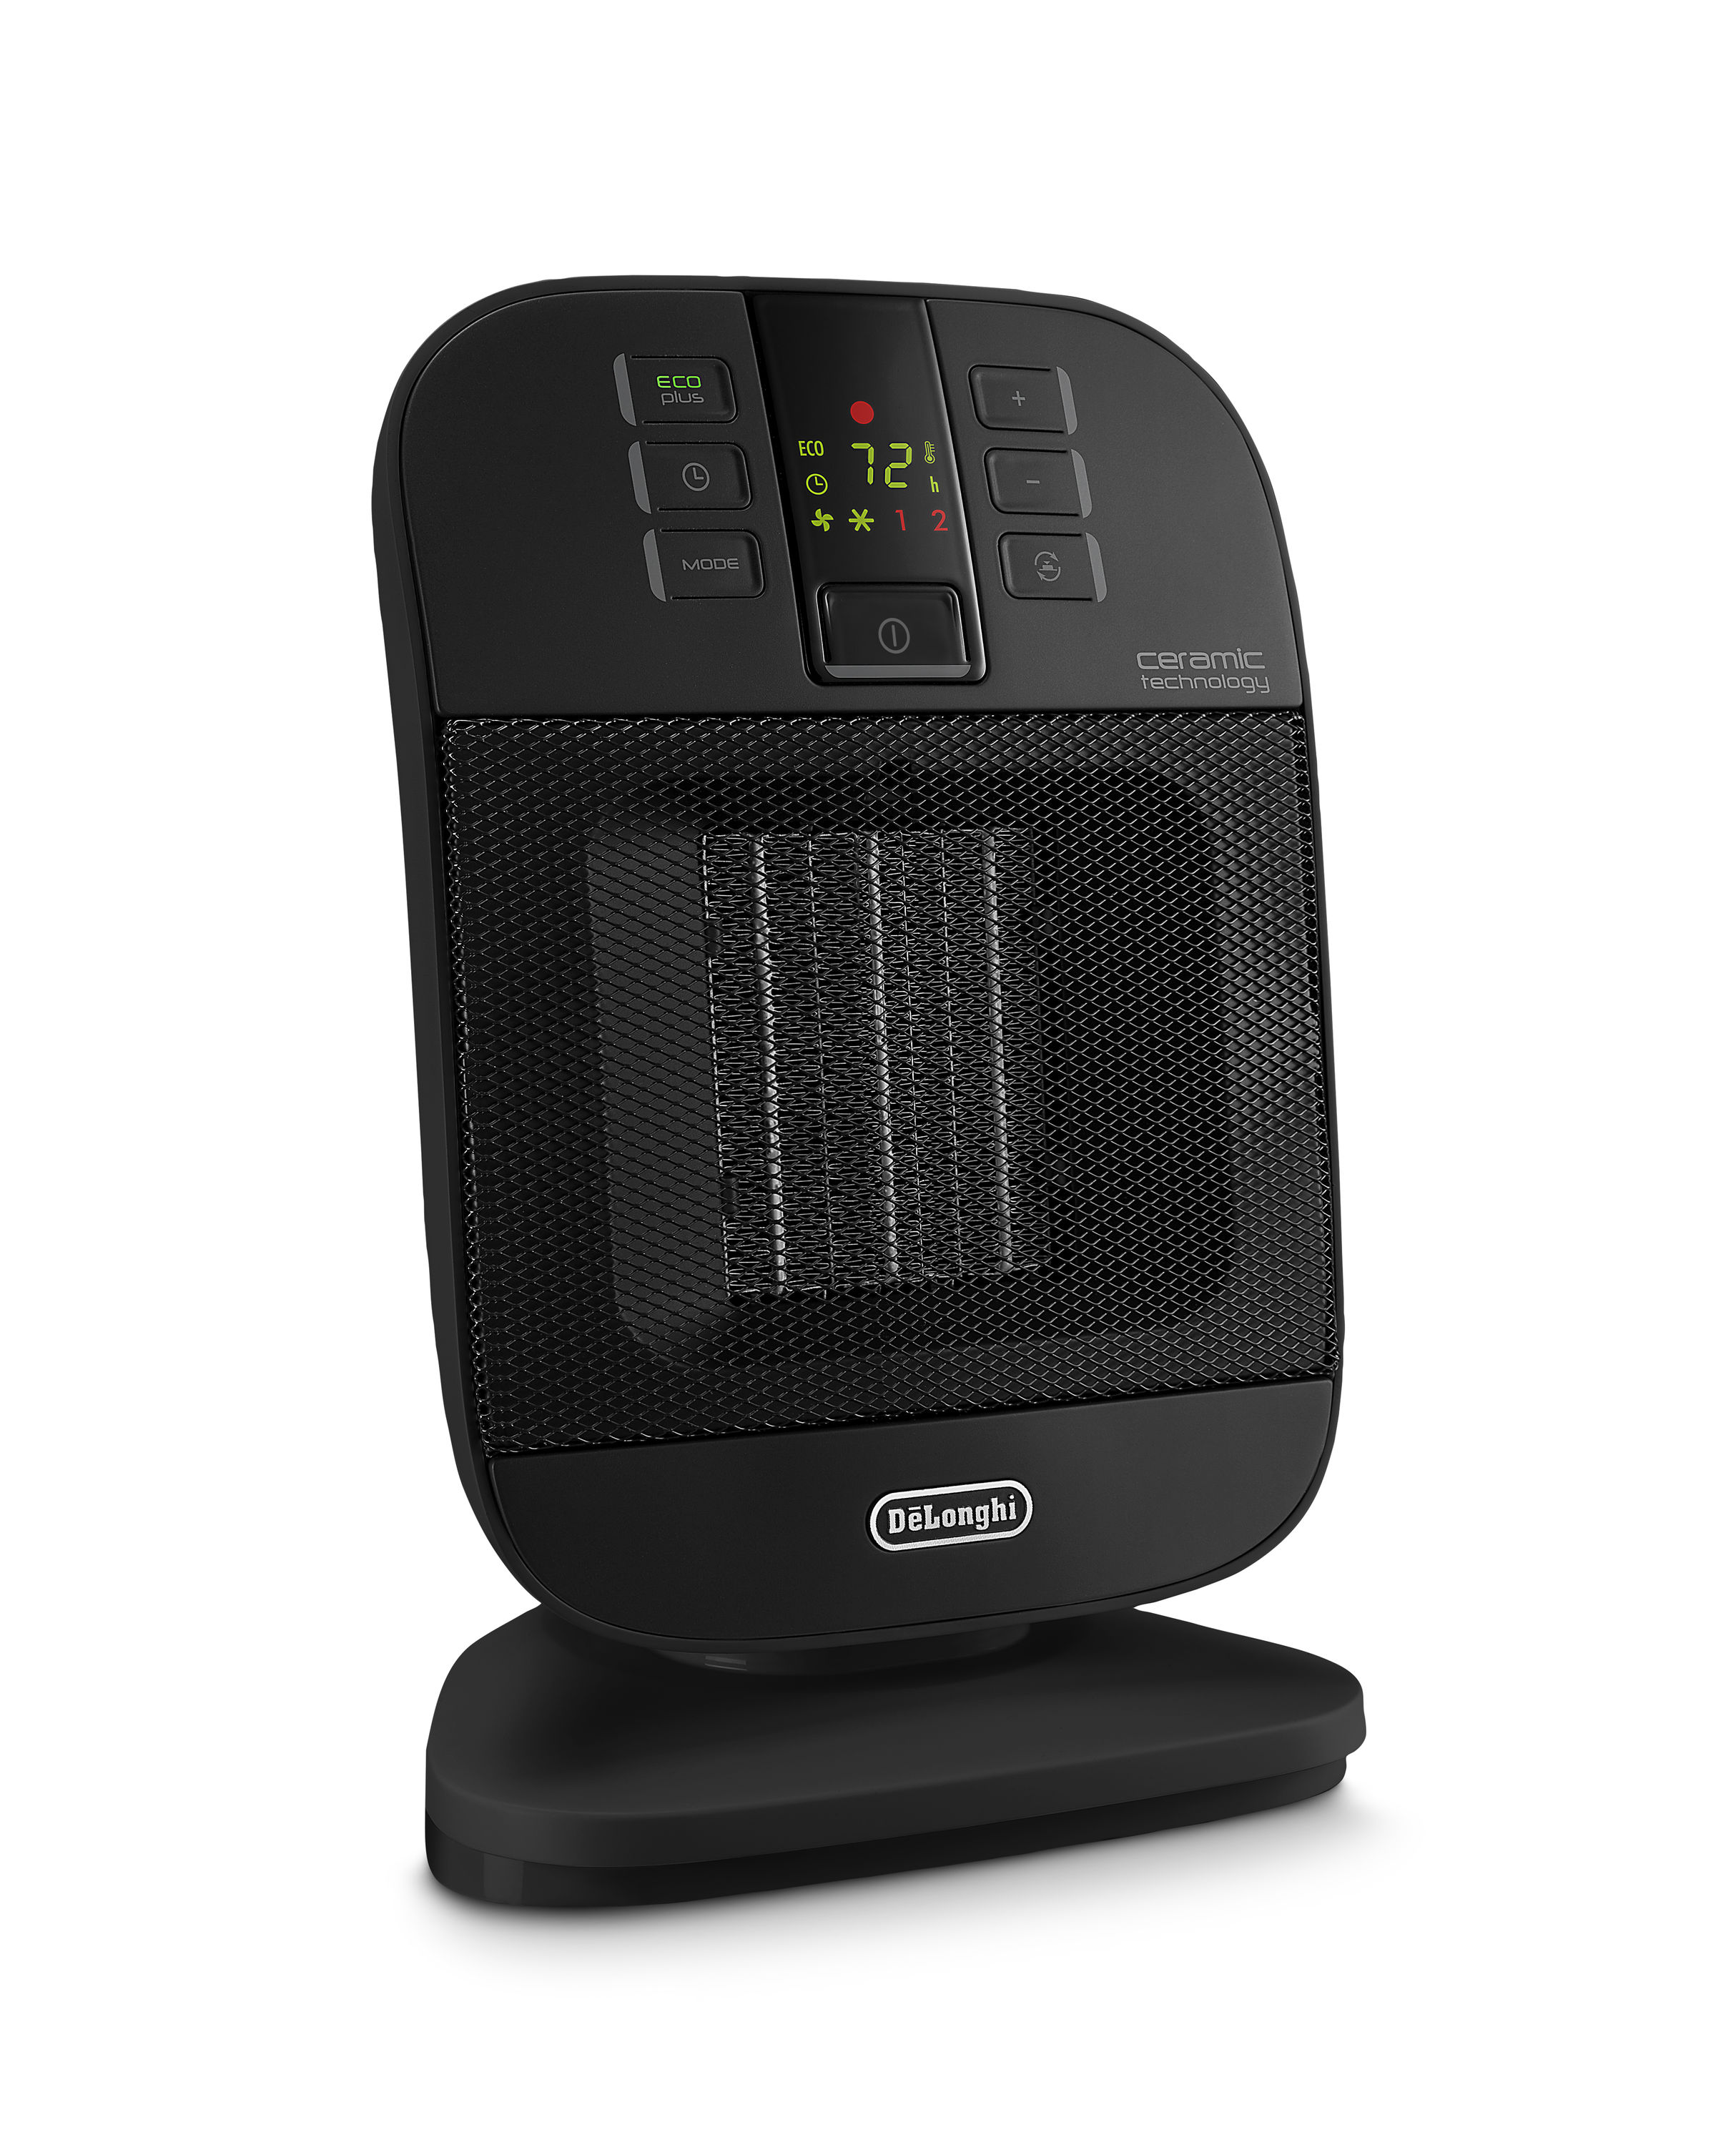 BLACK+DECKER Oscillating Space Heater, Portable Heater with Remote Control,  Ceramic Small Space Heater with Two Heat Settings & LED Display, Small